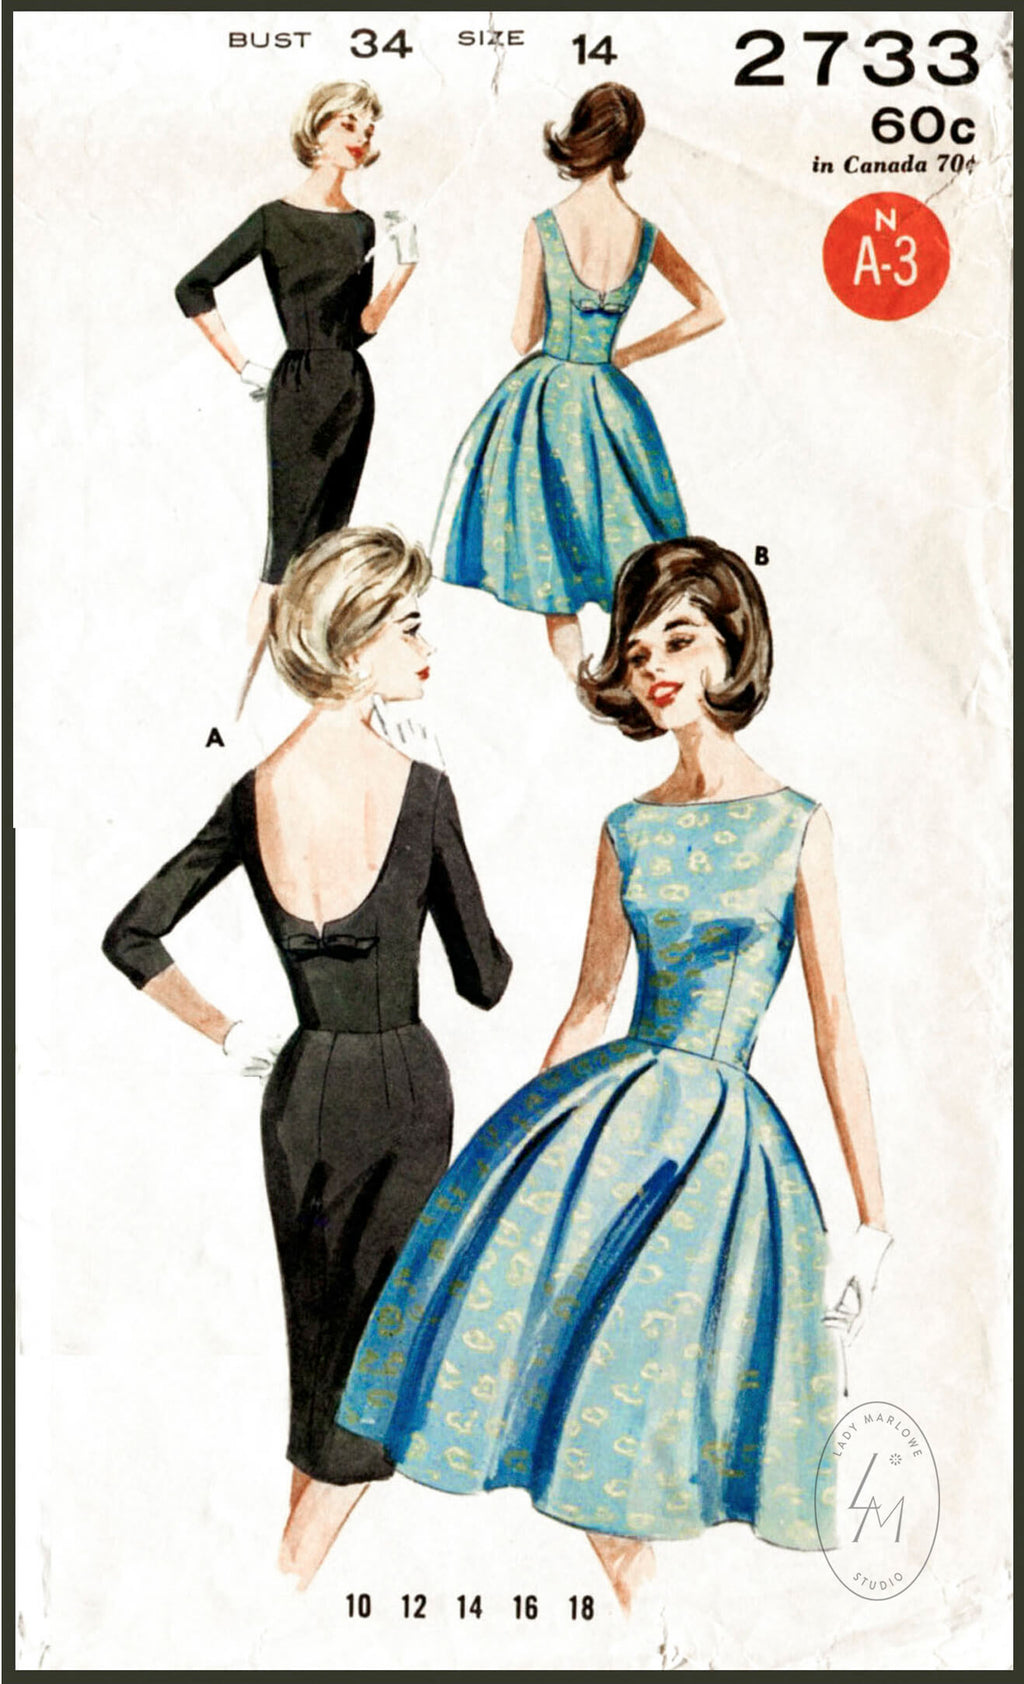 Butterick 2733 1960s LBD cocktail wiggle dress vintage sewing pattern